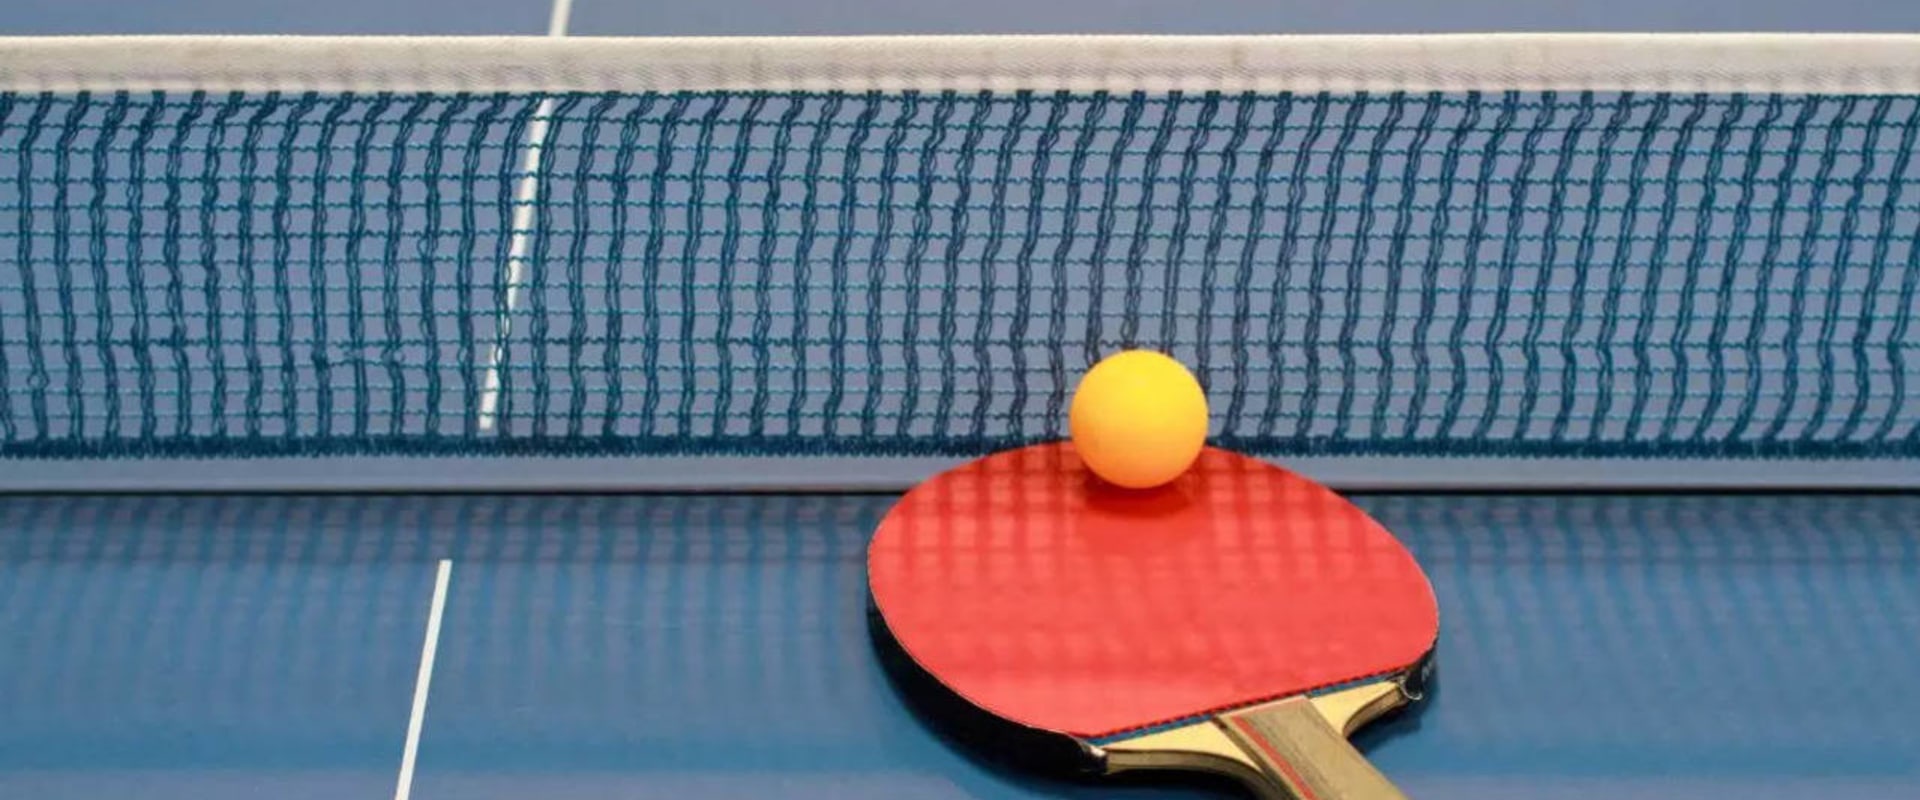 The Different Types of Spin in Table Tennis